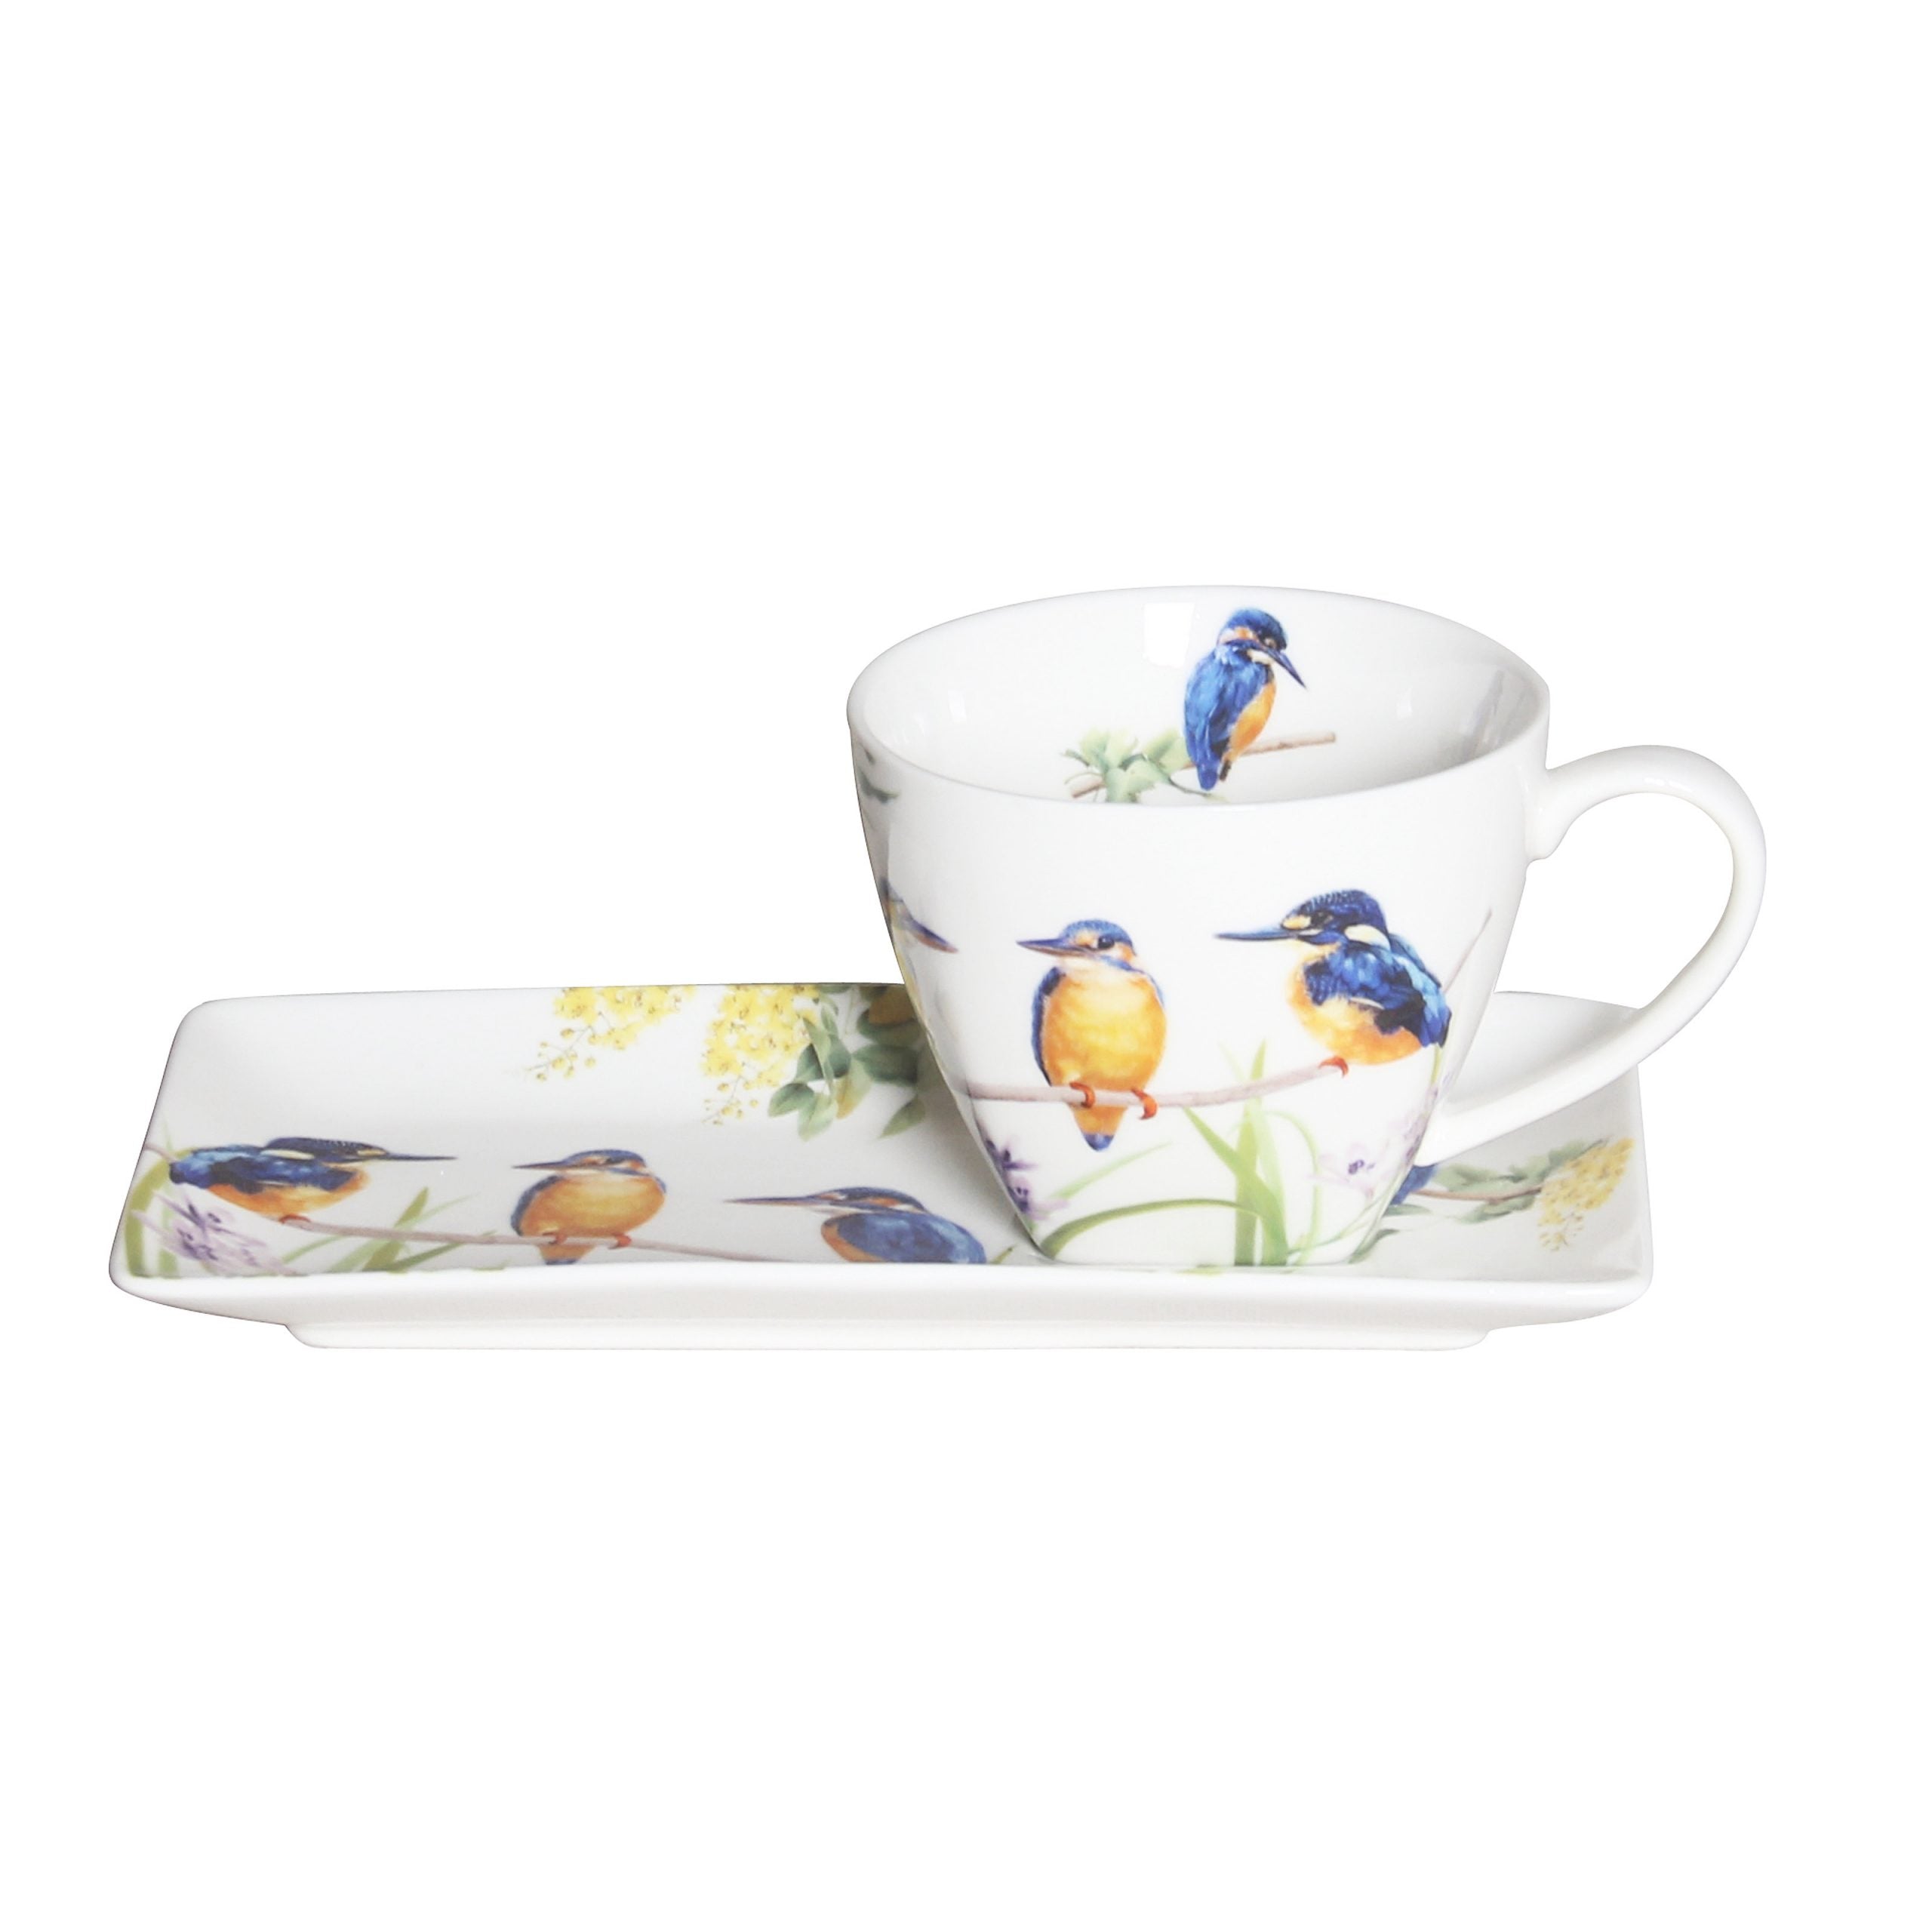 Kingfisher on Fine Bone China Cup and Saucer breakfast Set - 250ml Gift Box - Dollars and Sense